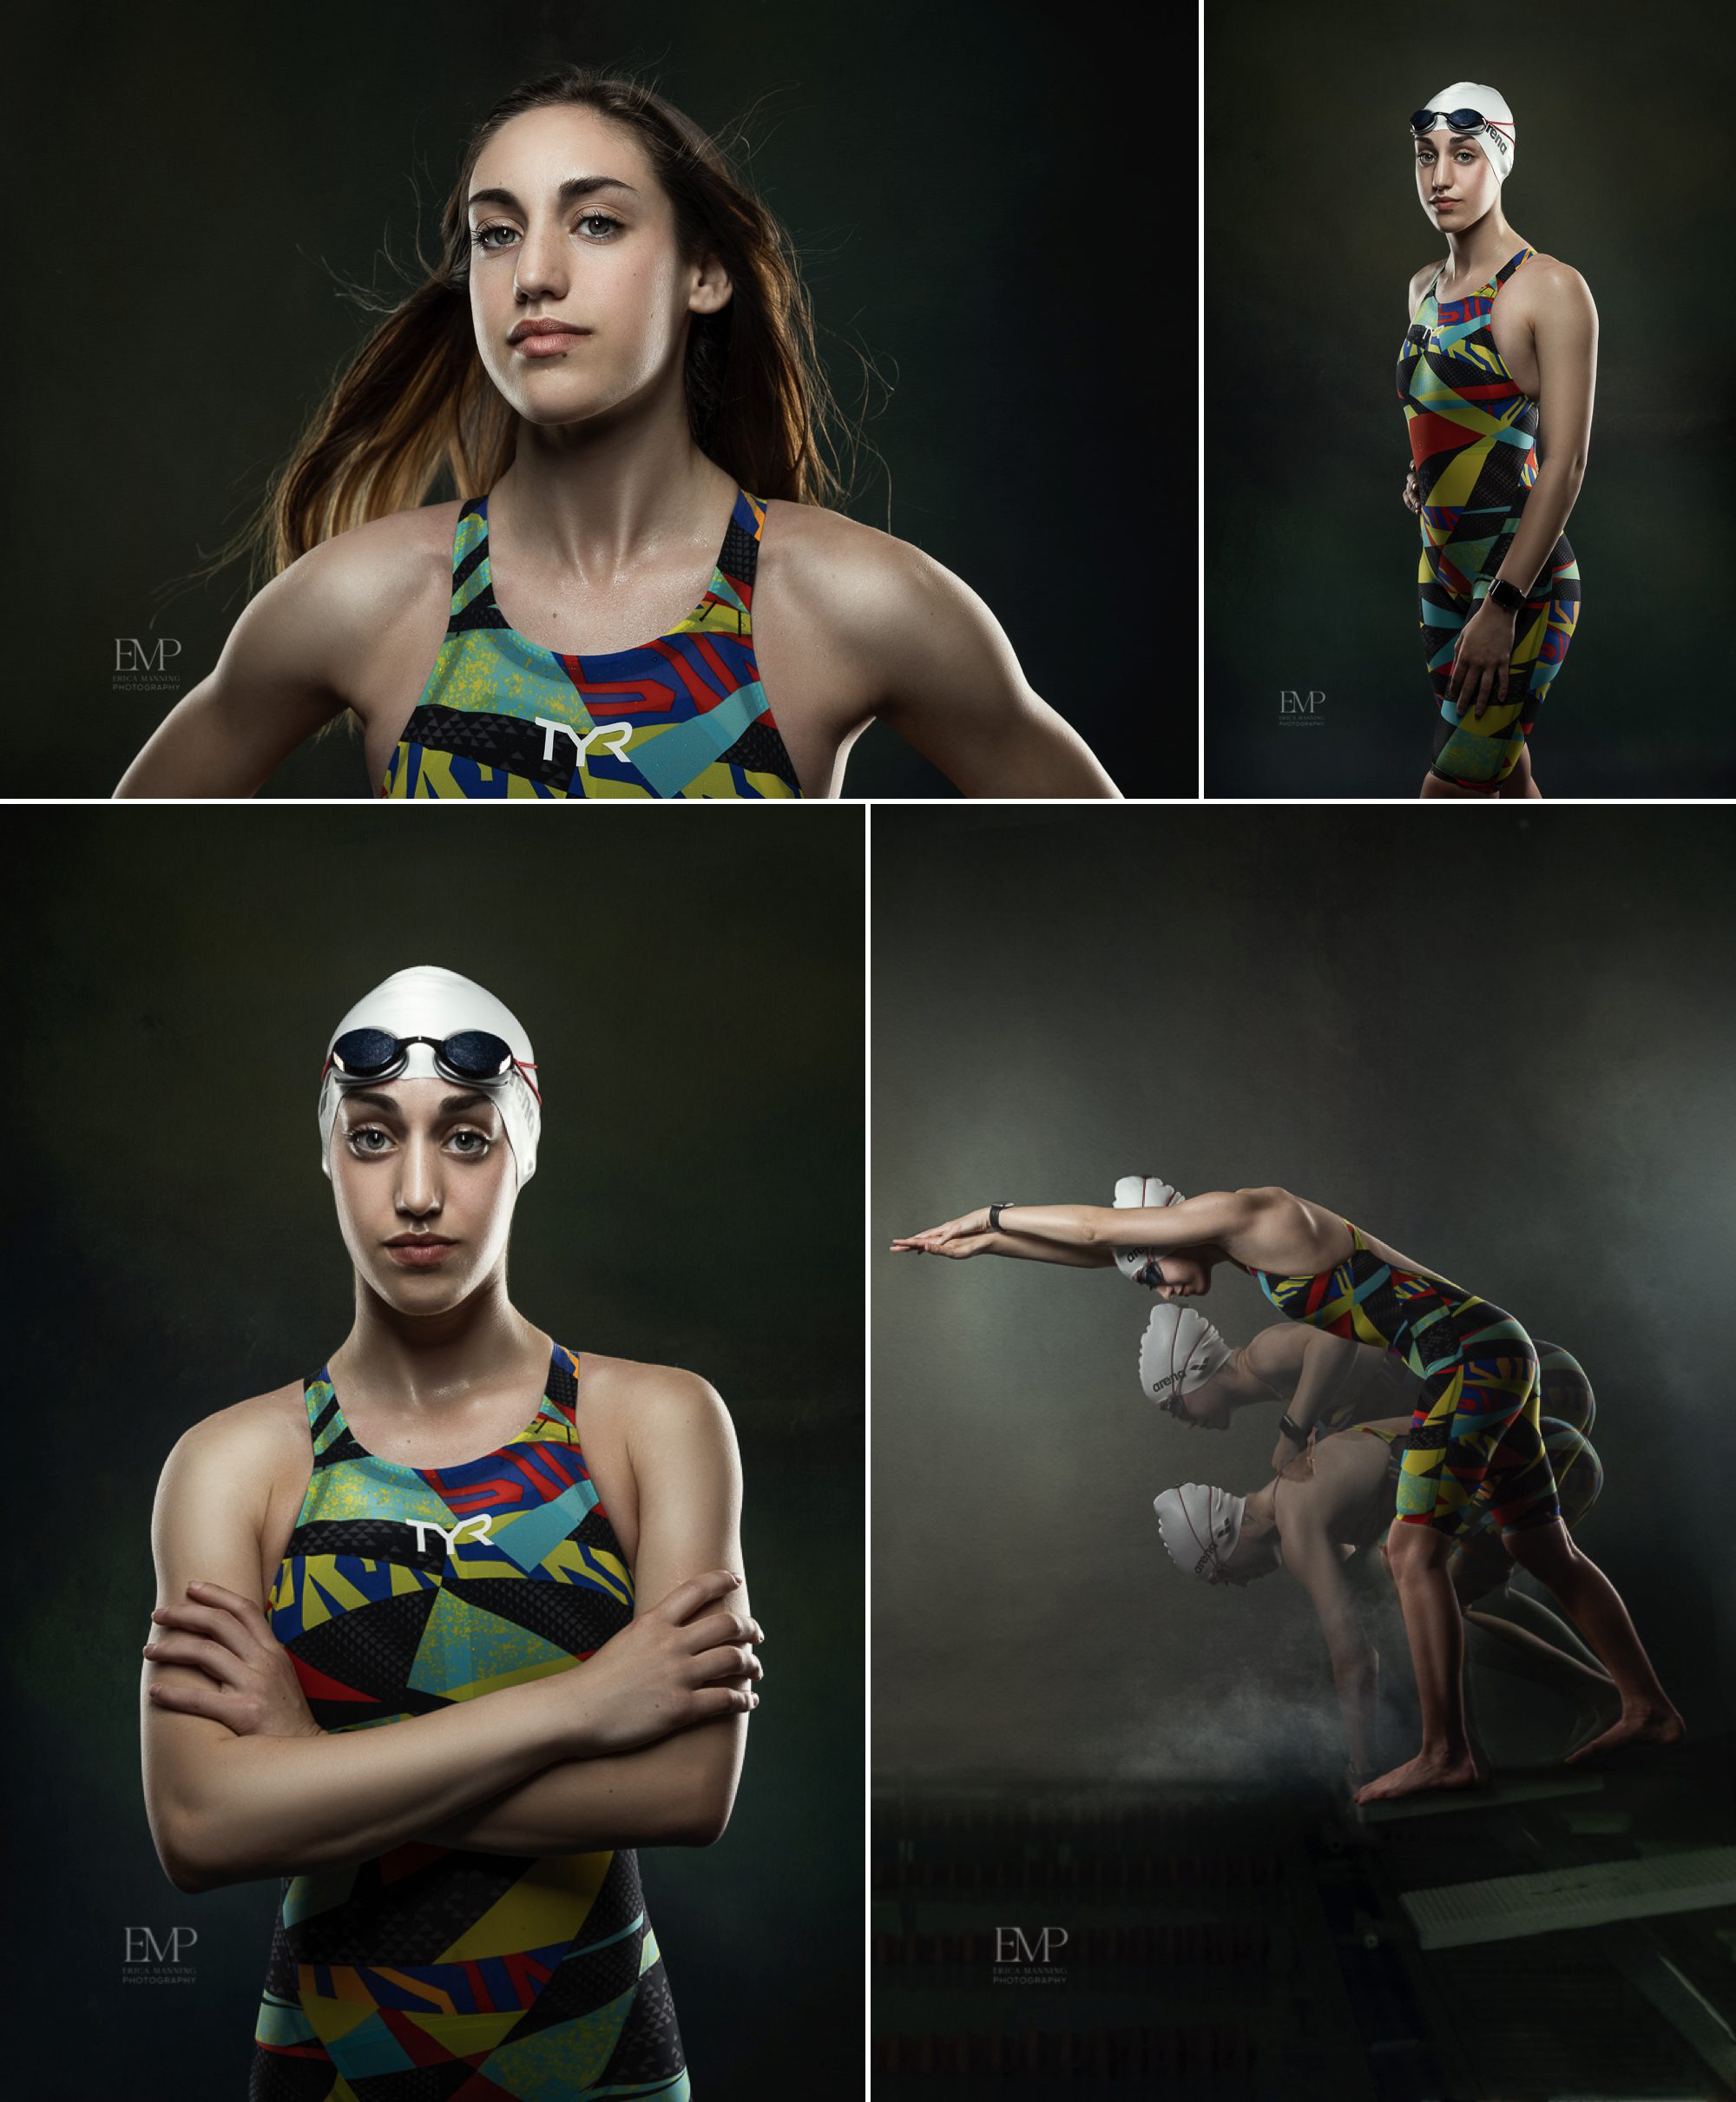 Action athletic creative photography swimmer